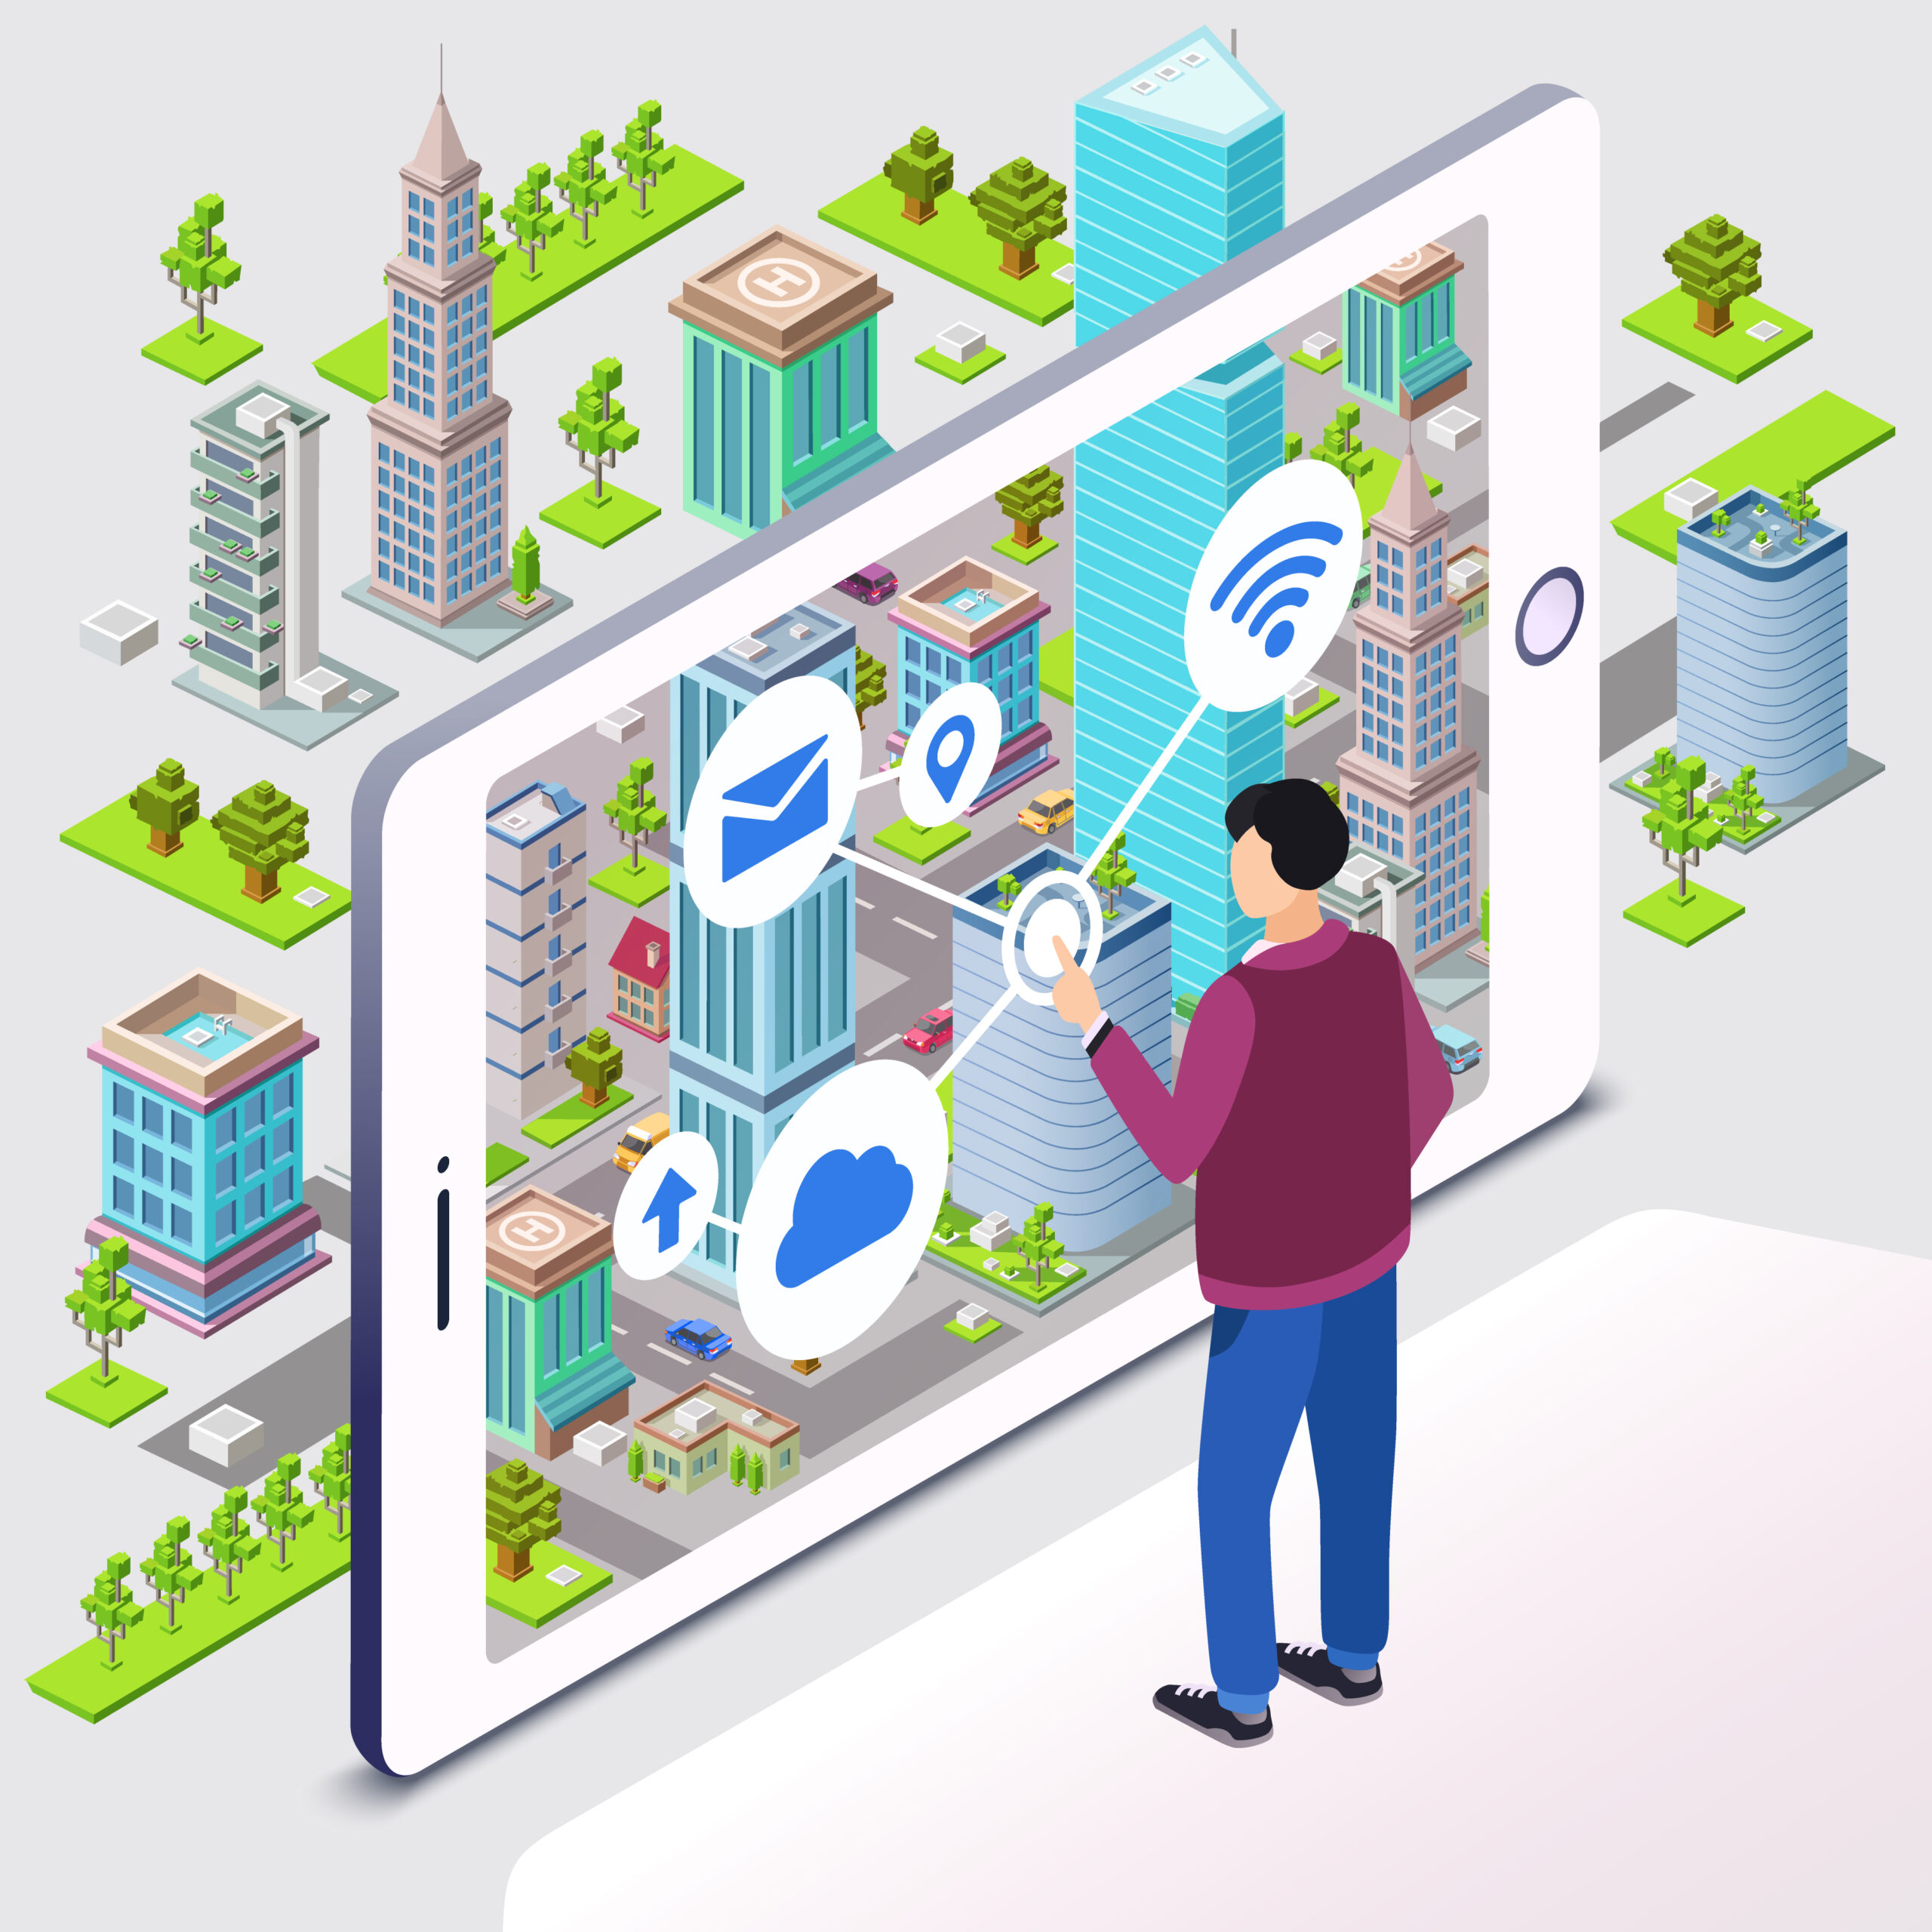 http://www.asgaur.com/wp/connected-living-the-smart-cities-of-tomorrow/